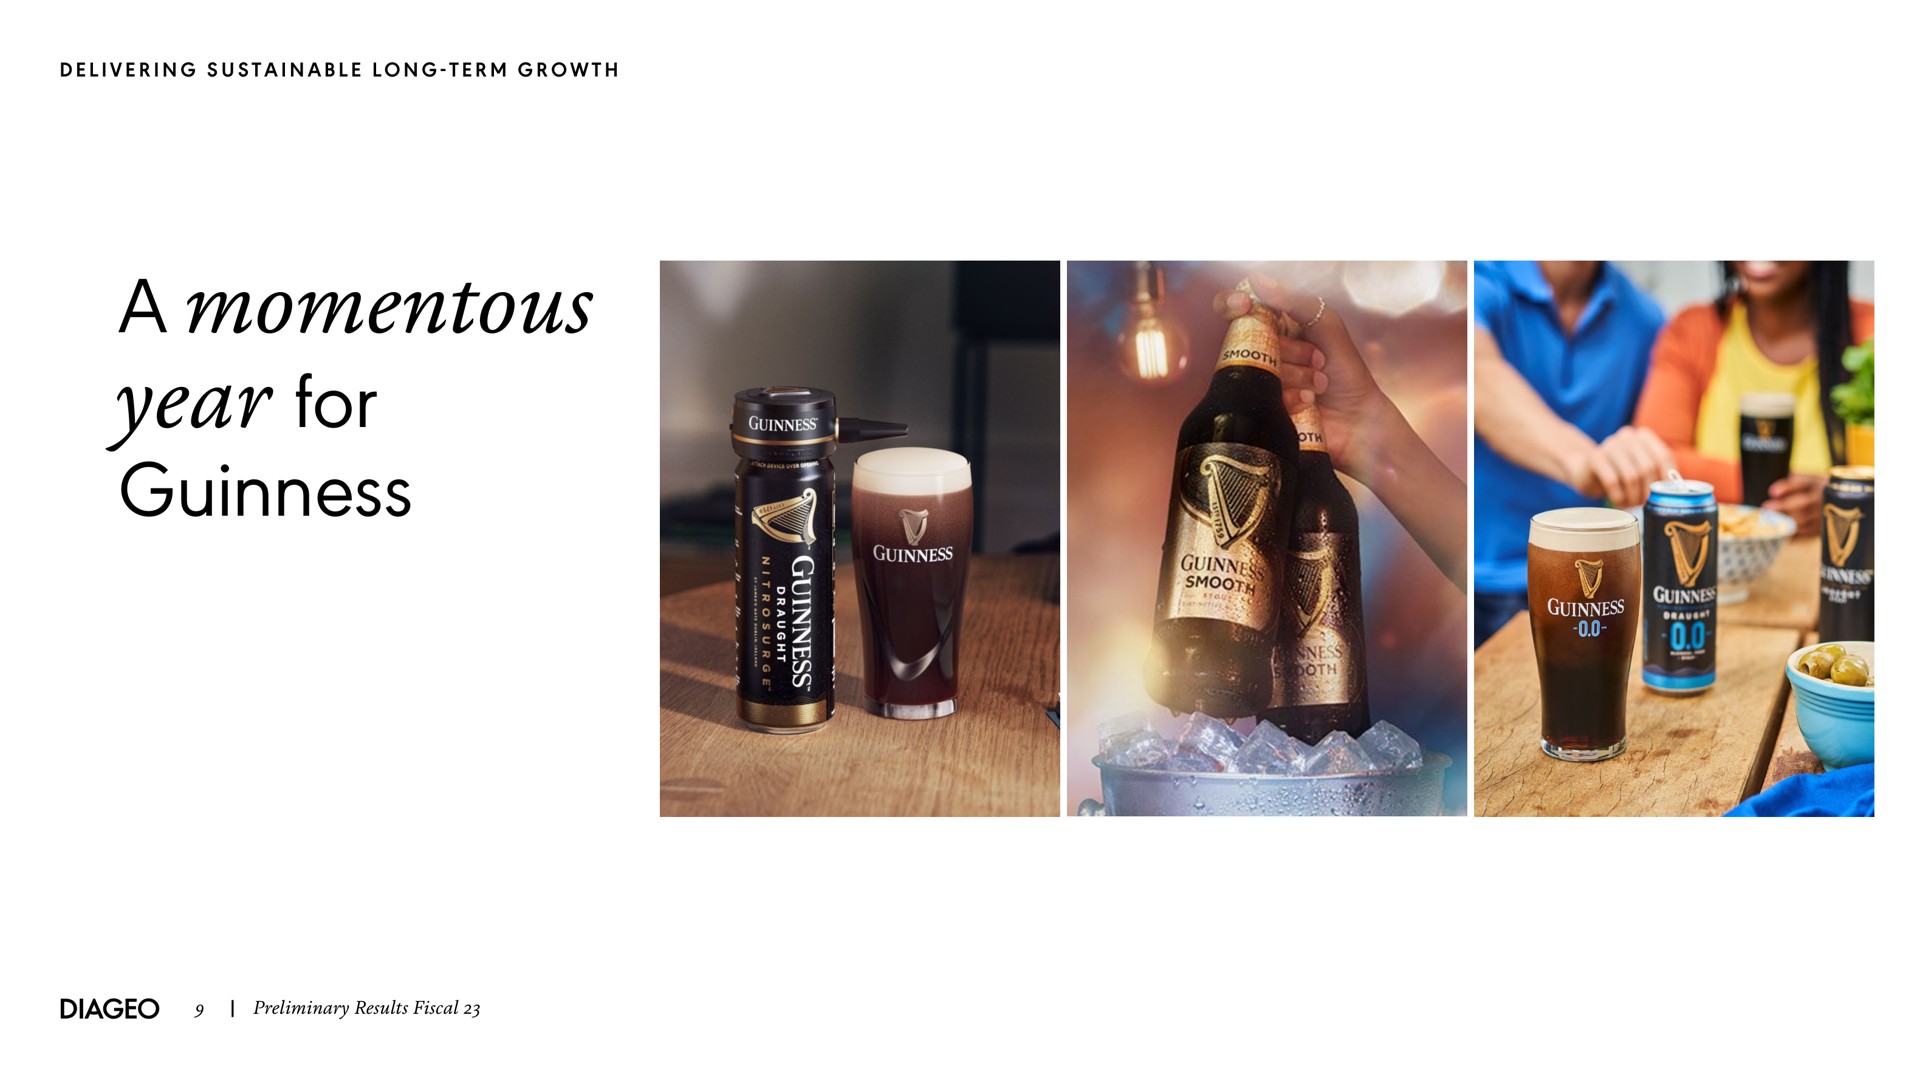 a momentous year for tor coma | Diageo